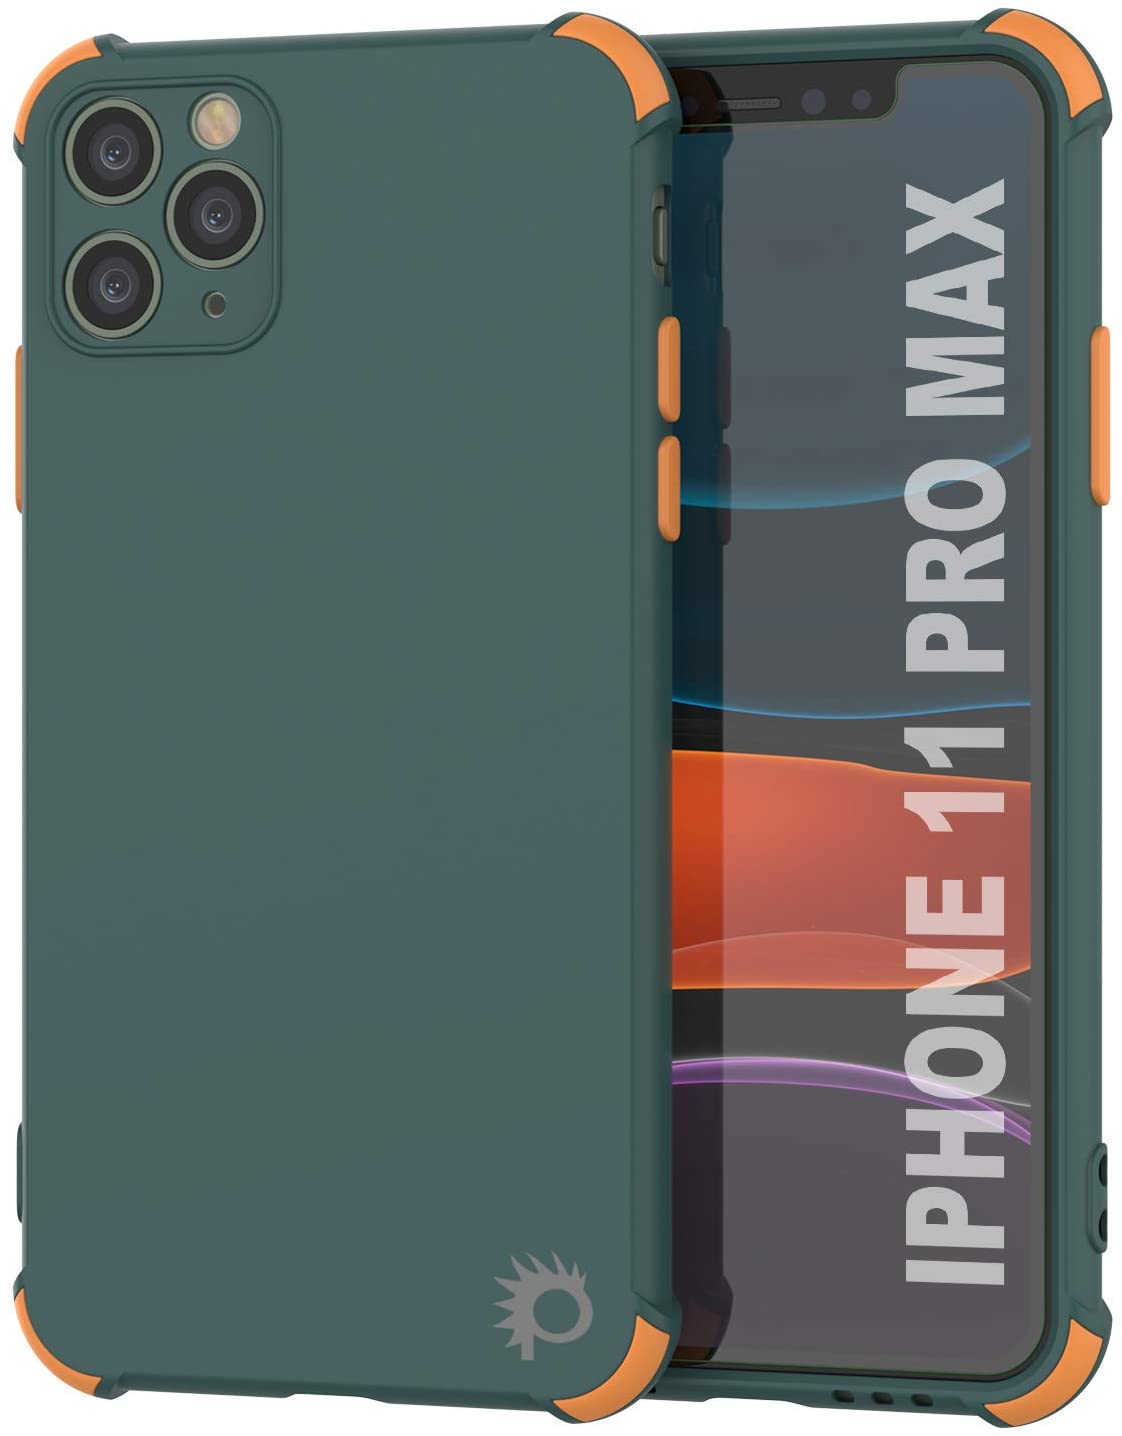 Punkcase Protective & Lightweight TPU Case [Sunshine Series] for iPhone 11 Pro Max [Dark Green] (Color in image: Dark Green)